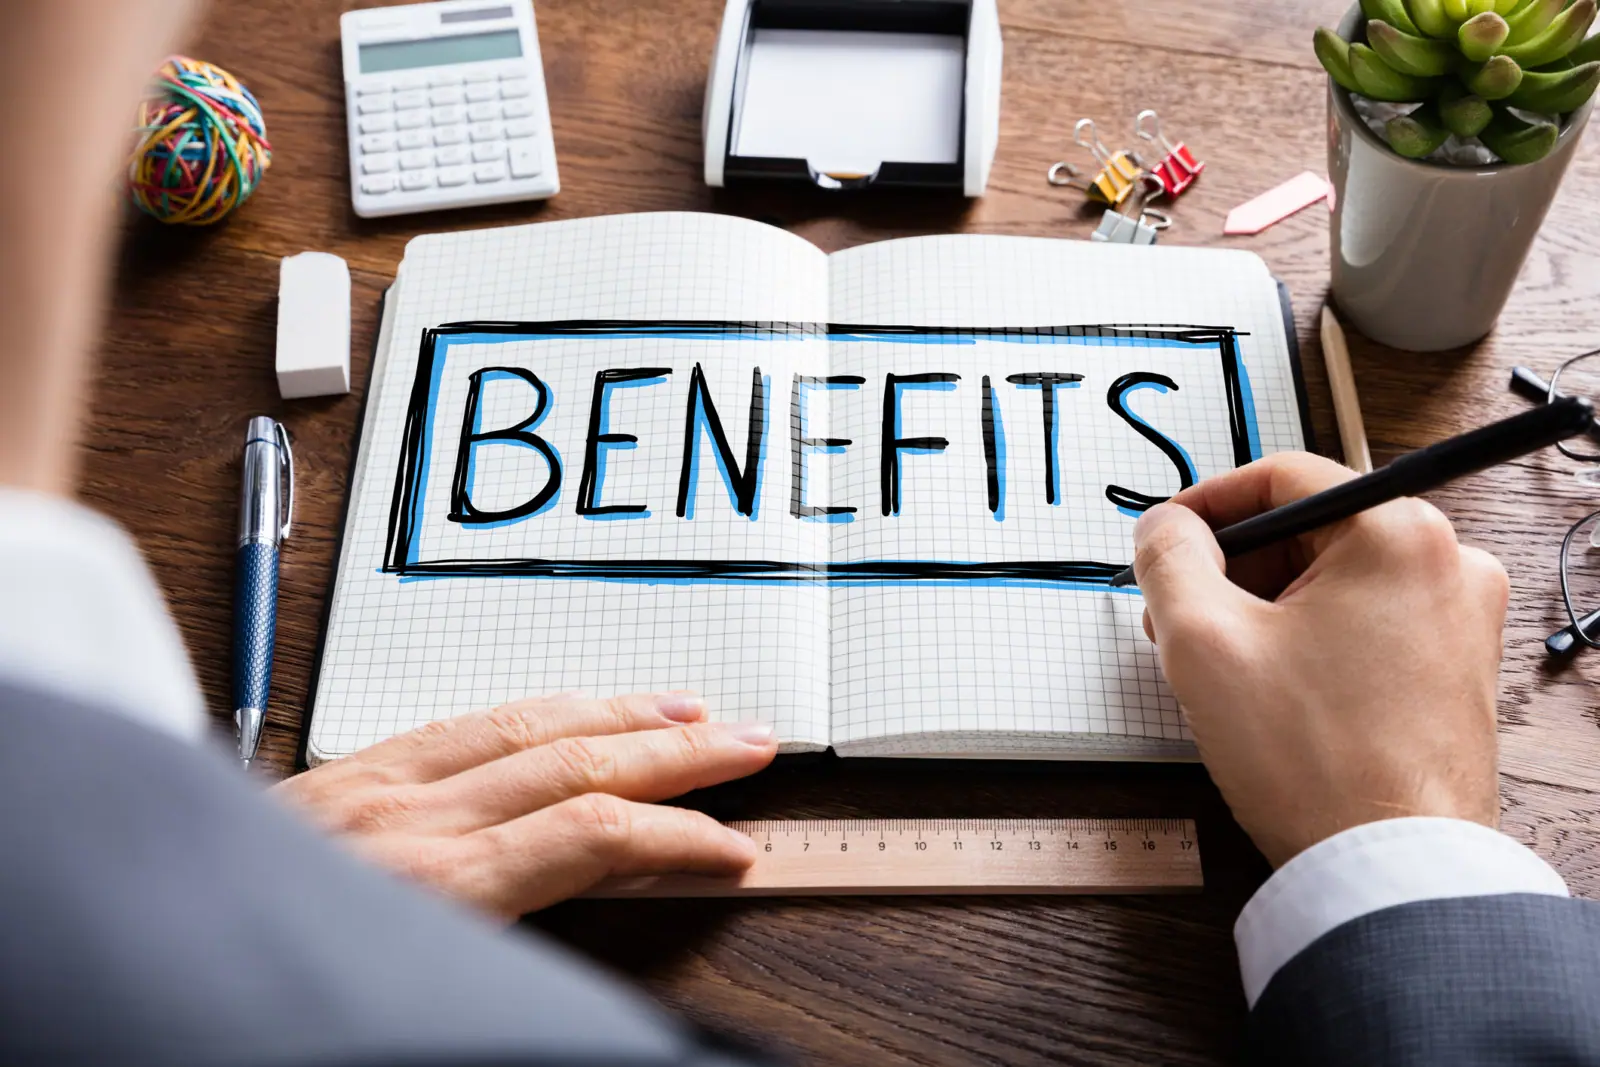 7 Out-of-The-Box Employee Benefits That Improve Retention